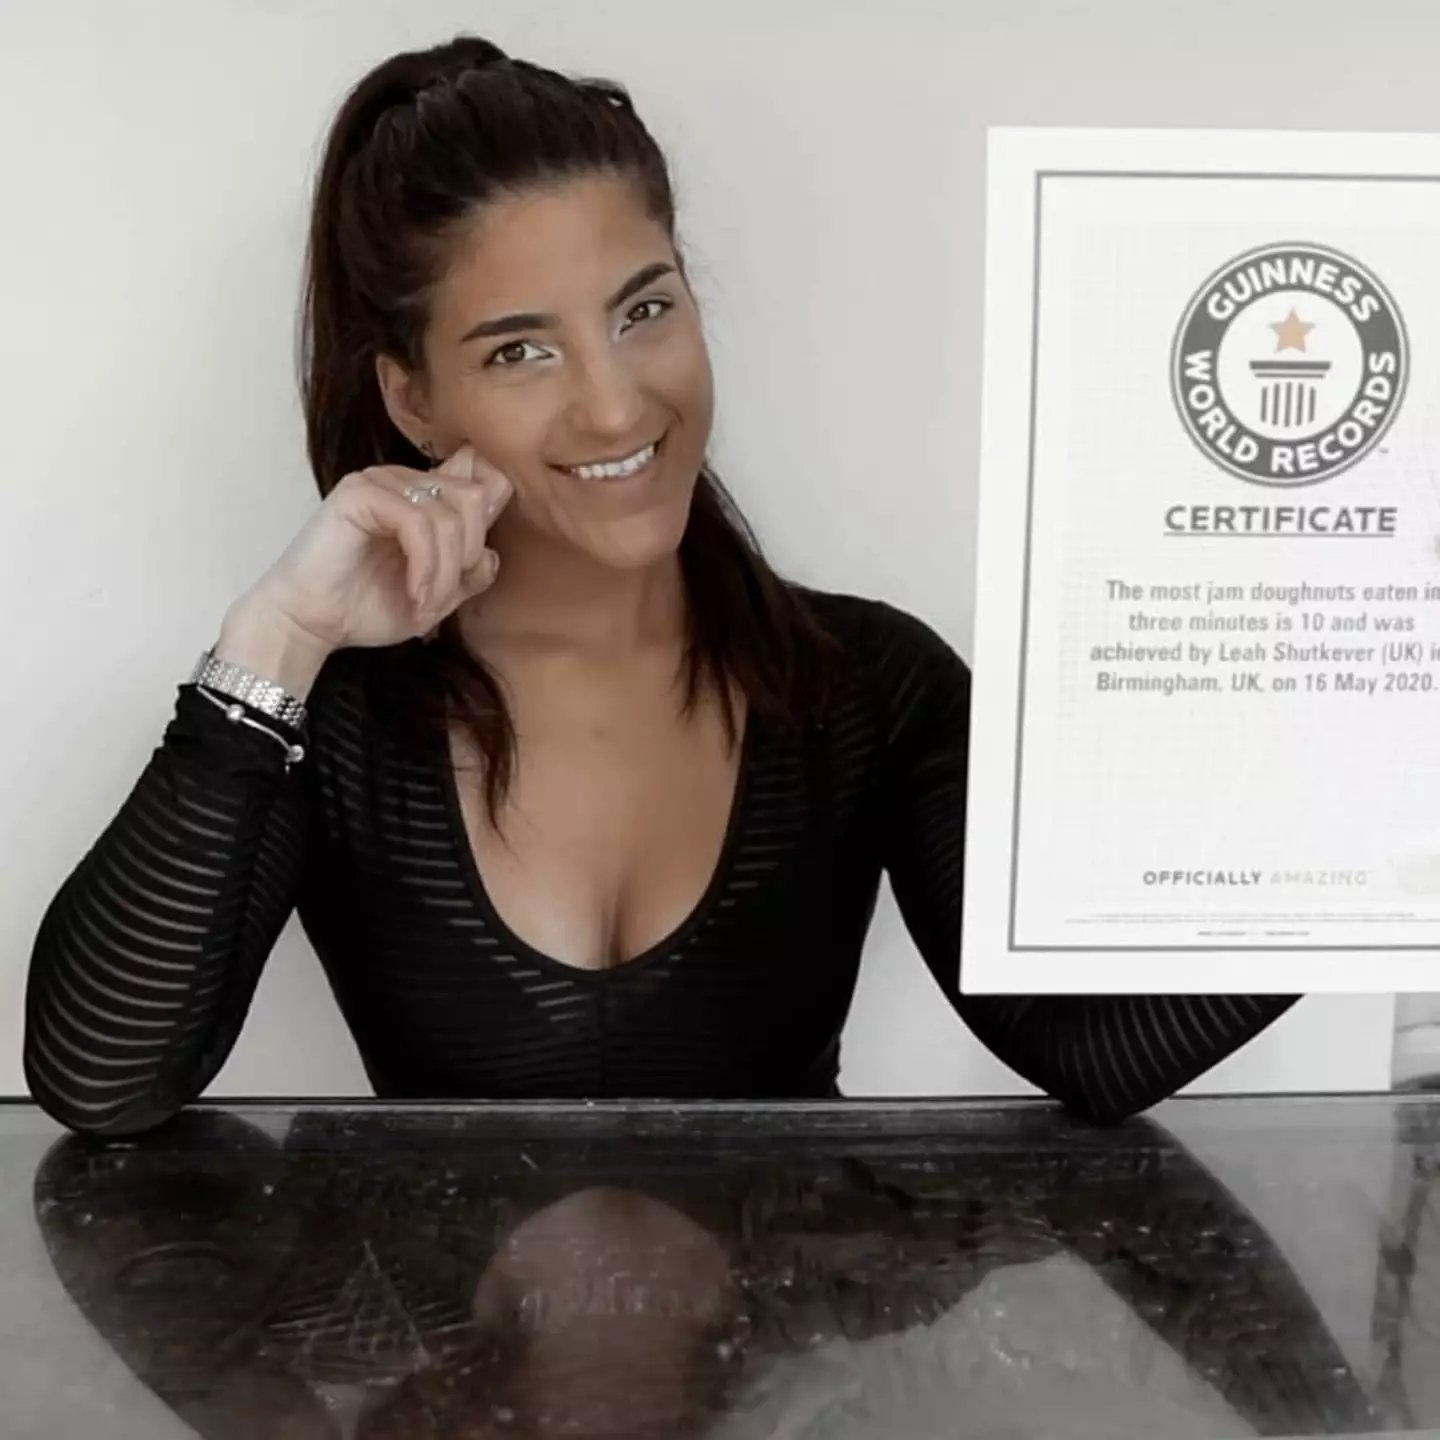 She currently holds 26 Guinness world records.